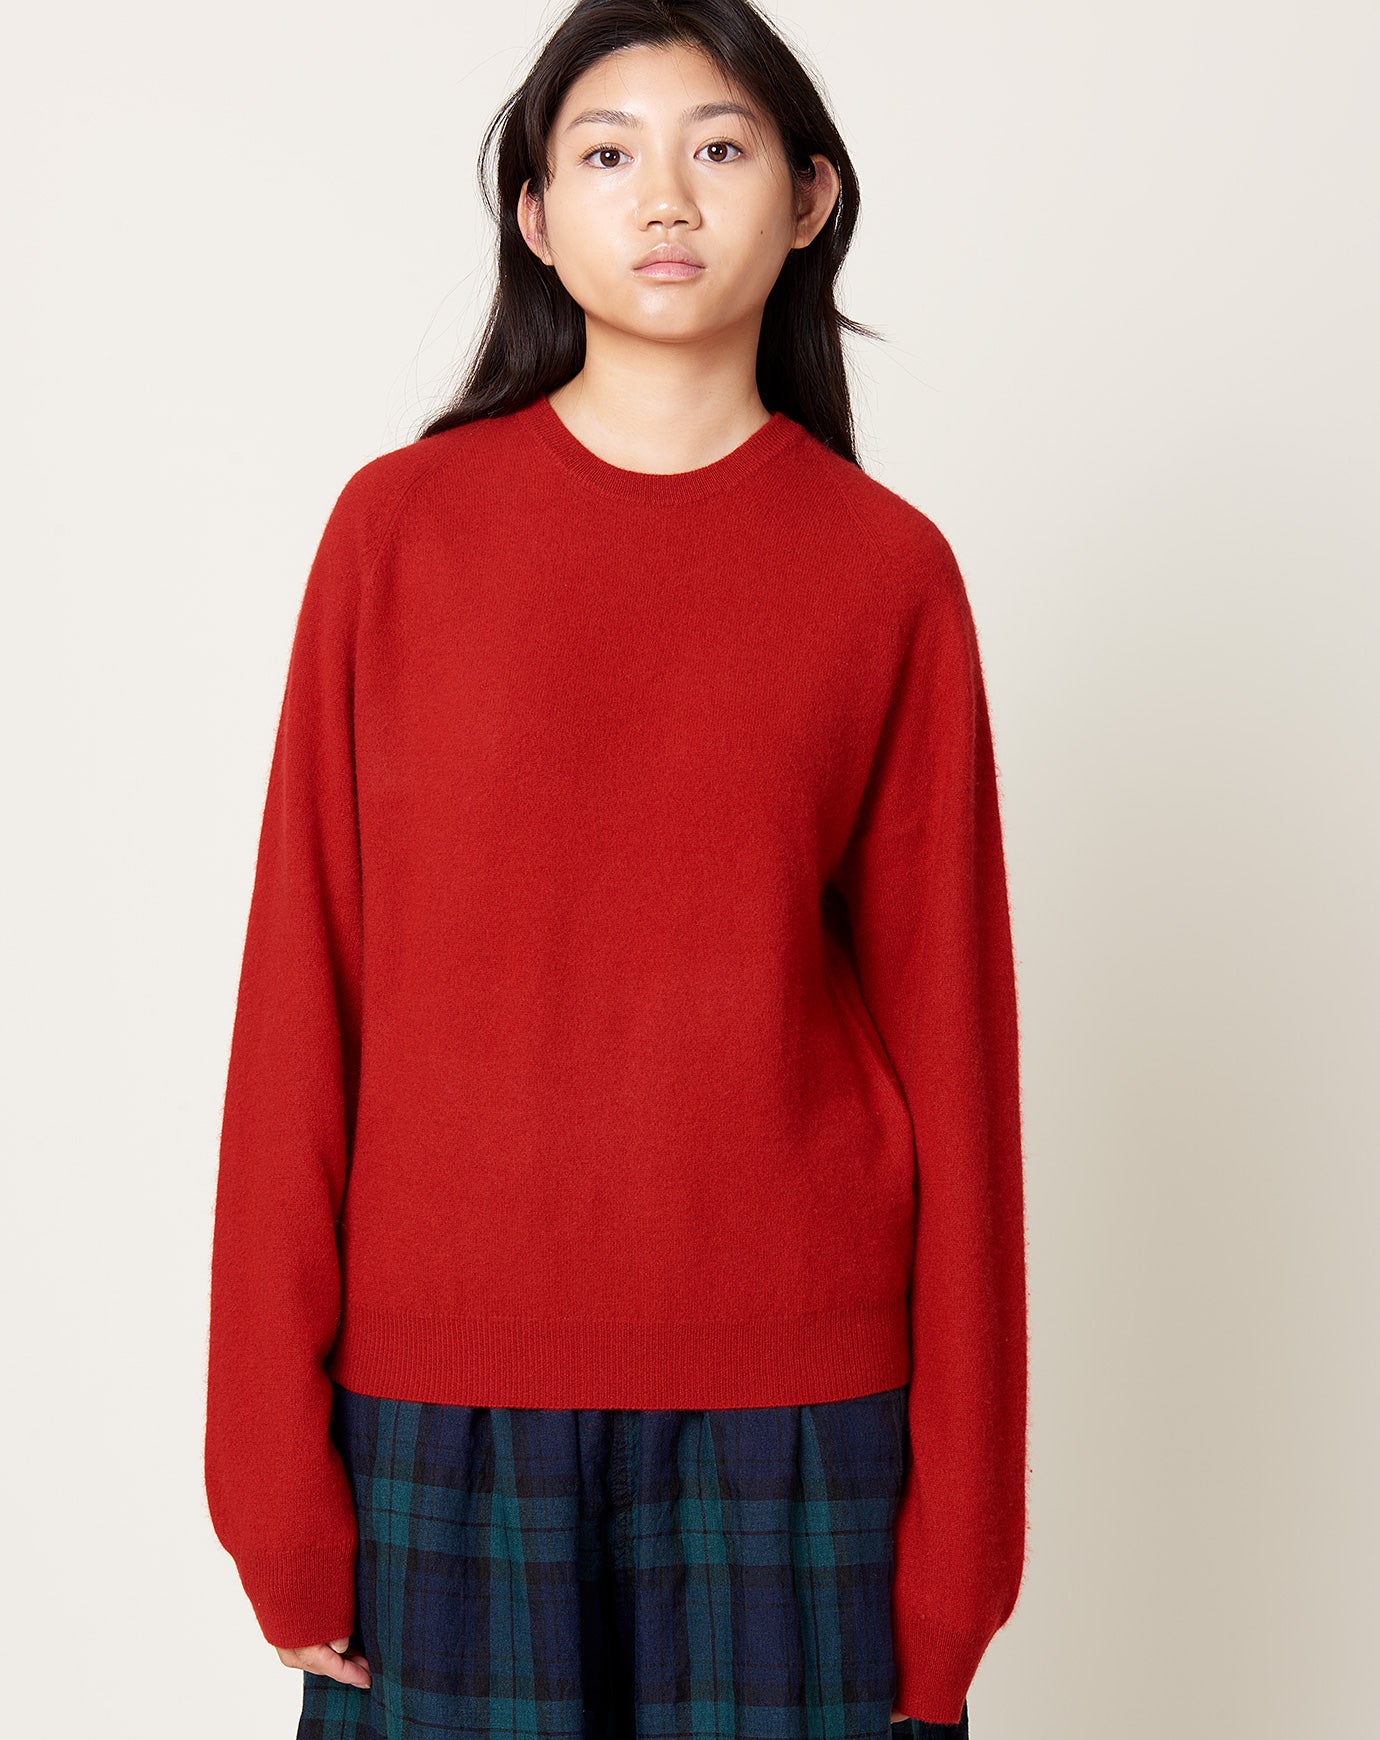 Frenckenberger Mini R Neck Sweater in Red